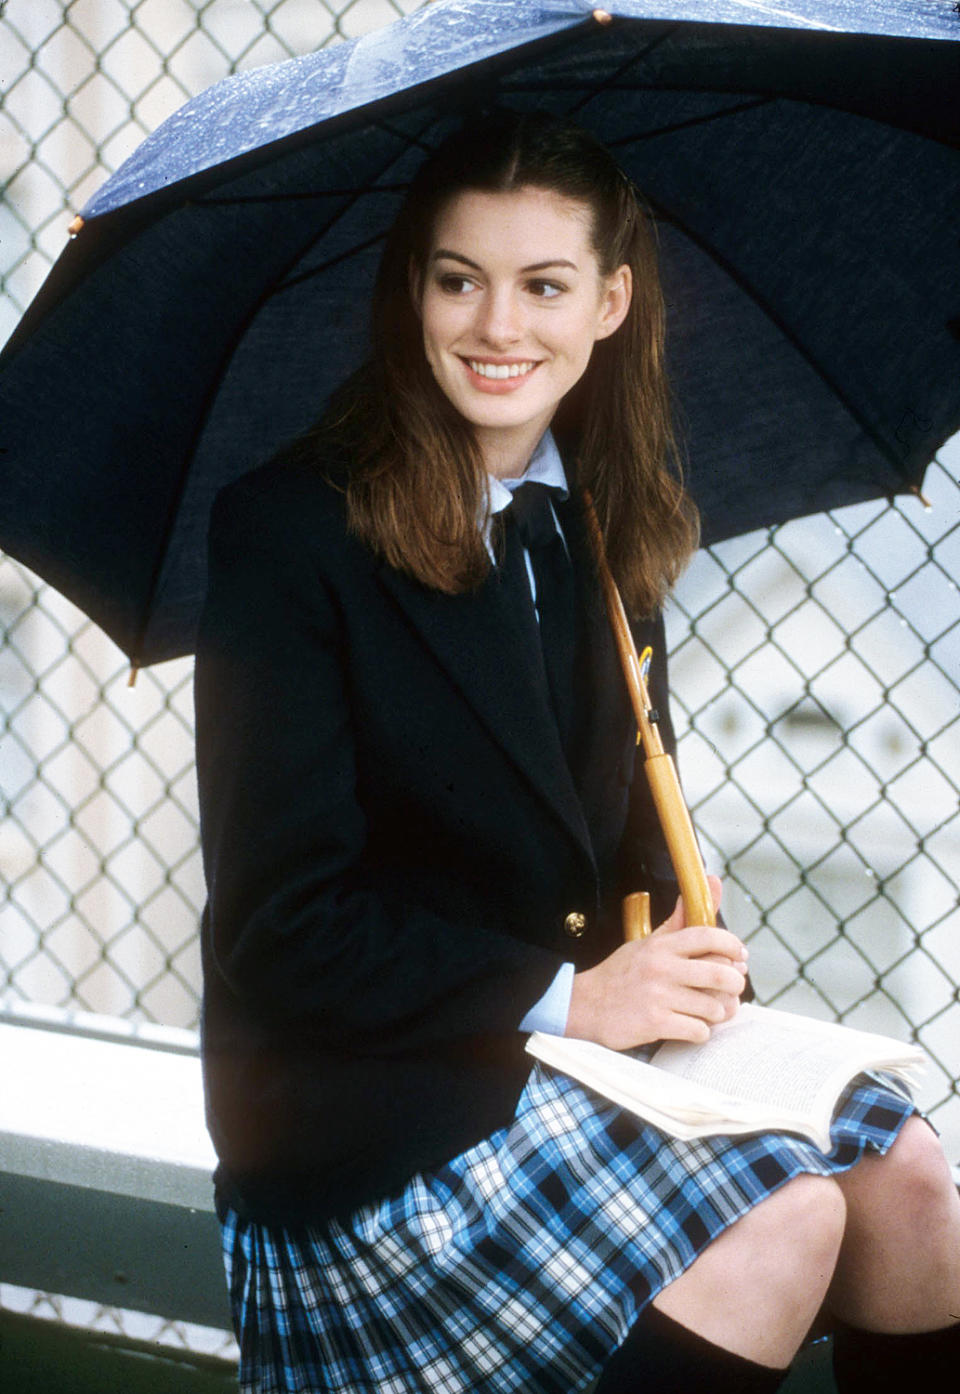 Anne Hathaway won over hearts when she played Mia, an ordinary girl who learns she's actually a princess in 2001's The Princess Diaries.